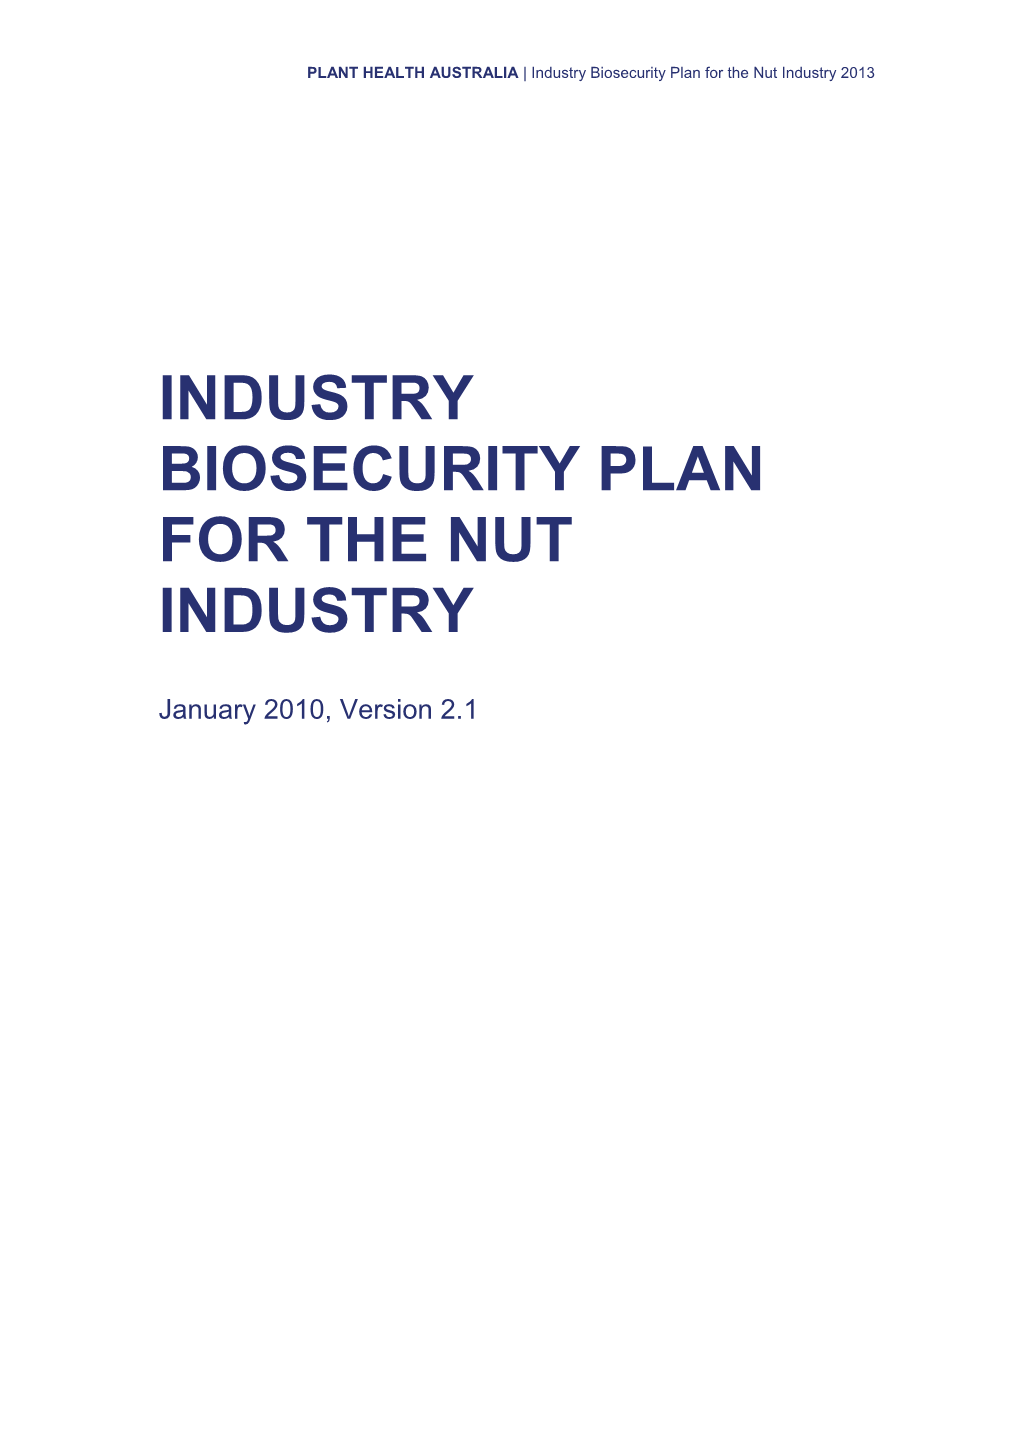 Nut Industry Biosecurity Planning Protection from Risks Posed by Pests to the Nut Industry Through Exclusion, Eradication and Control